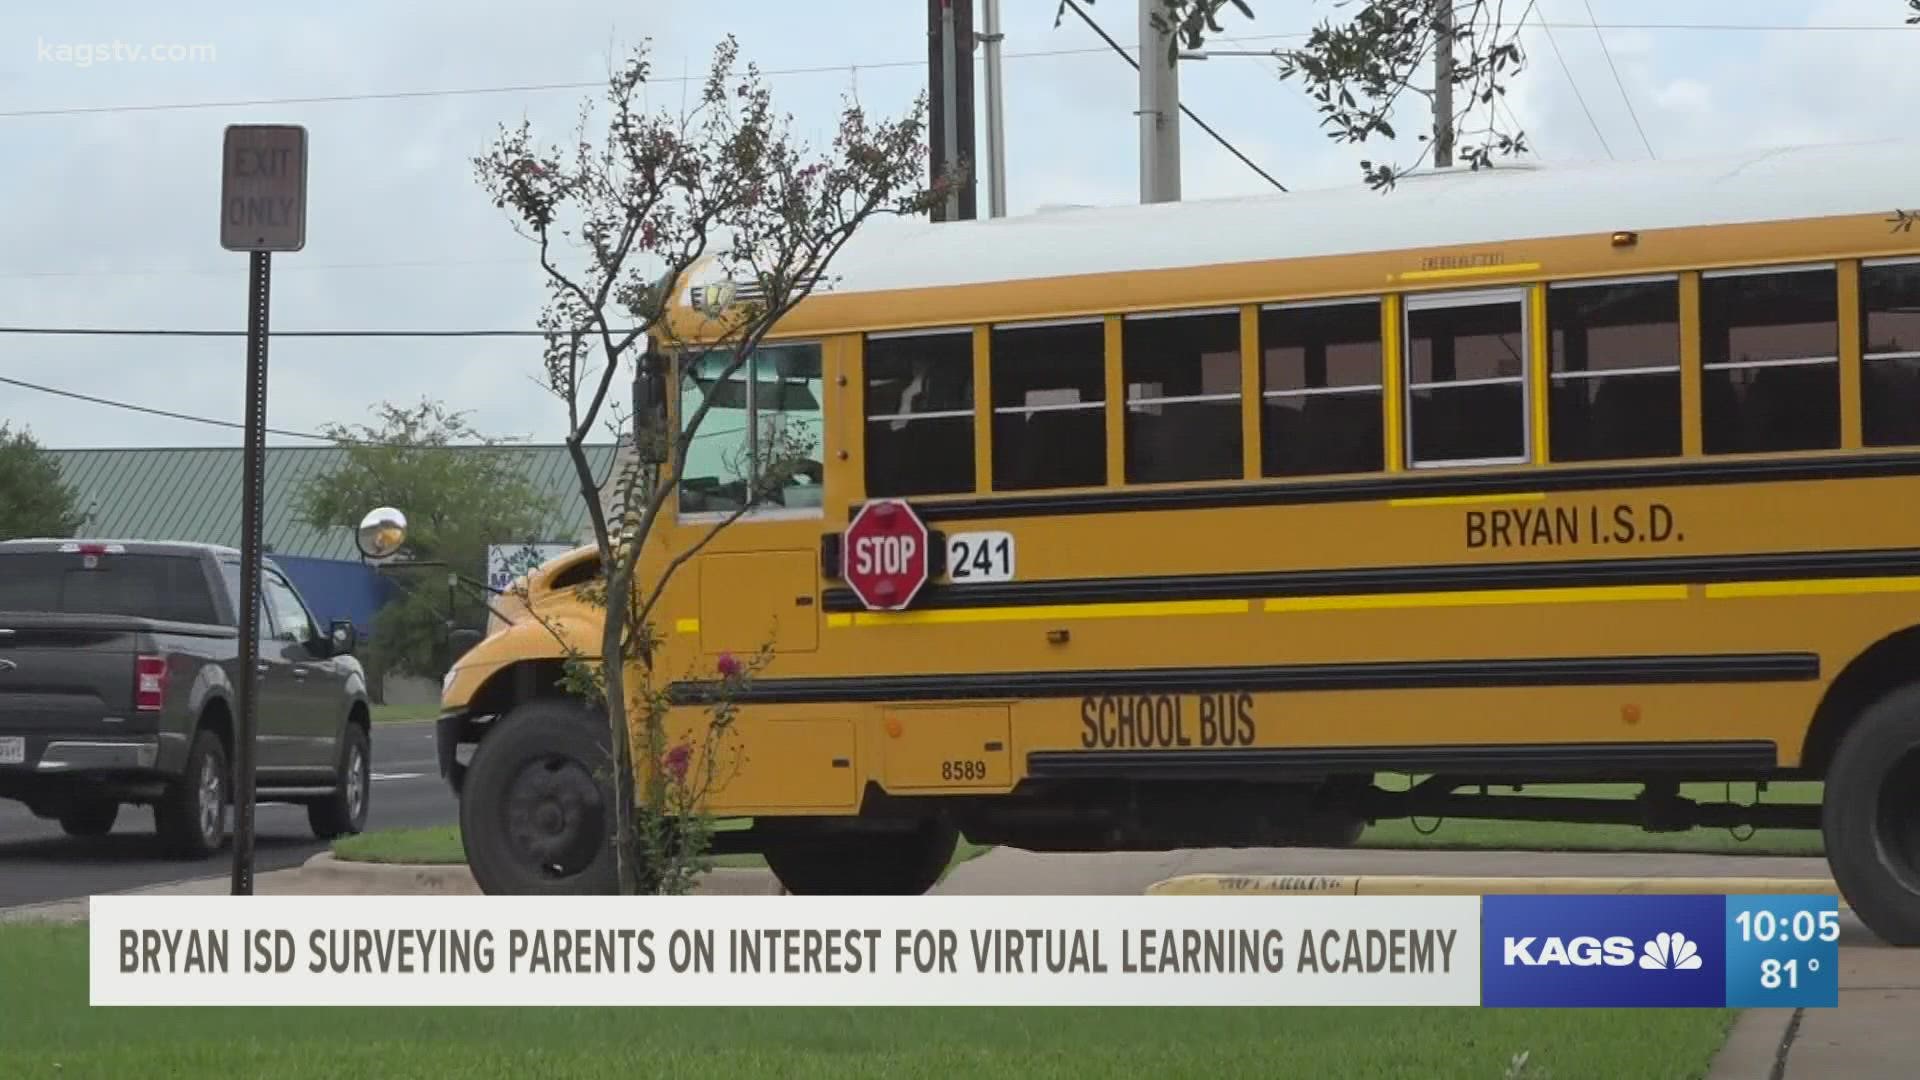 After parent concerns and funding approvals, Bryan ISD is considering the teaching alternative